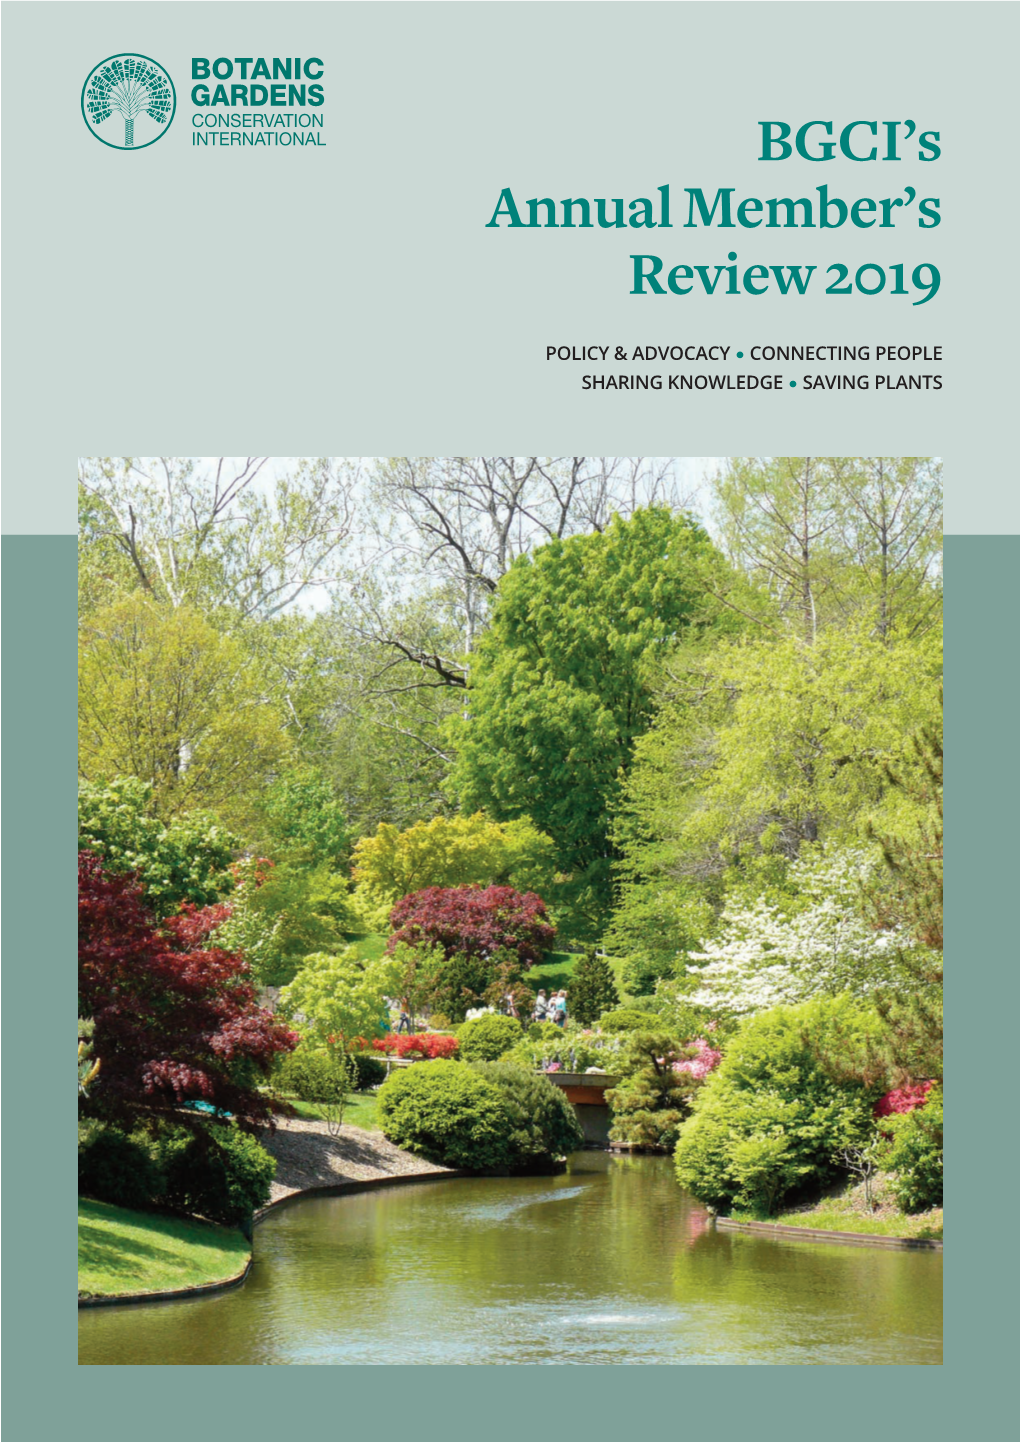 BGCI's Annual Member's Review 2019